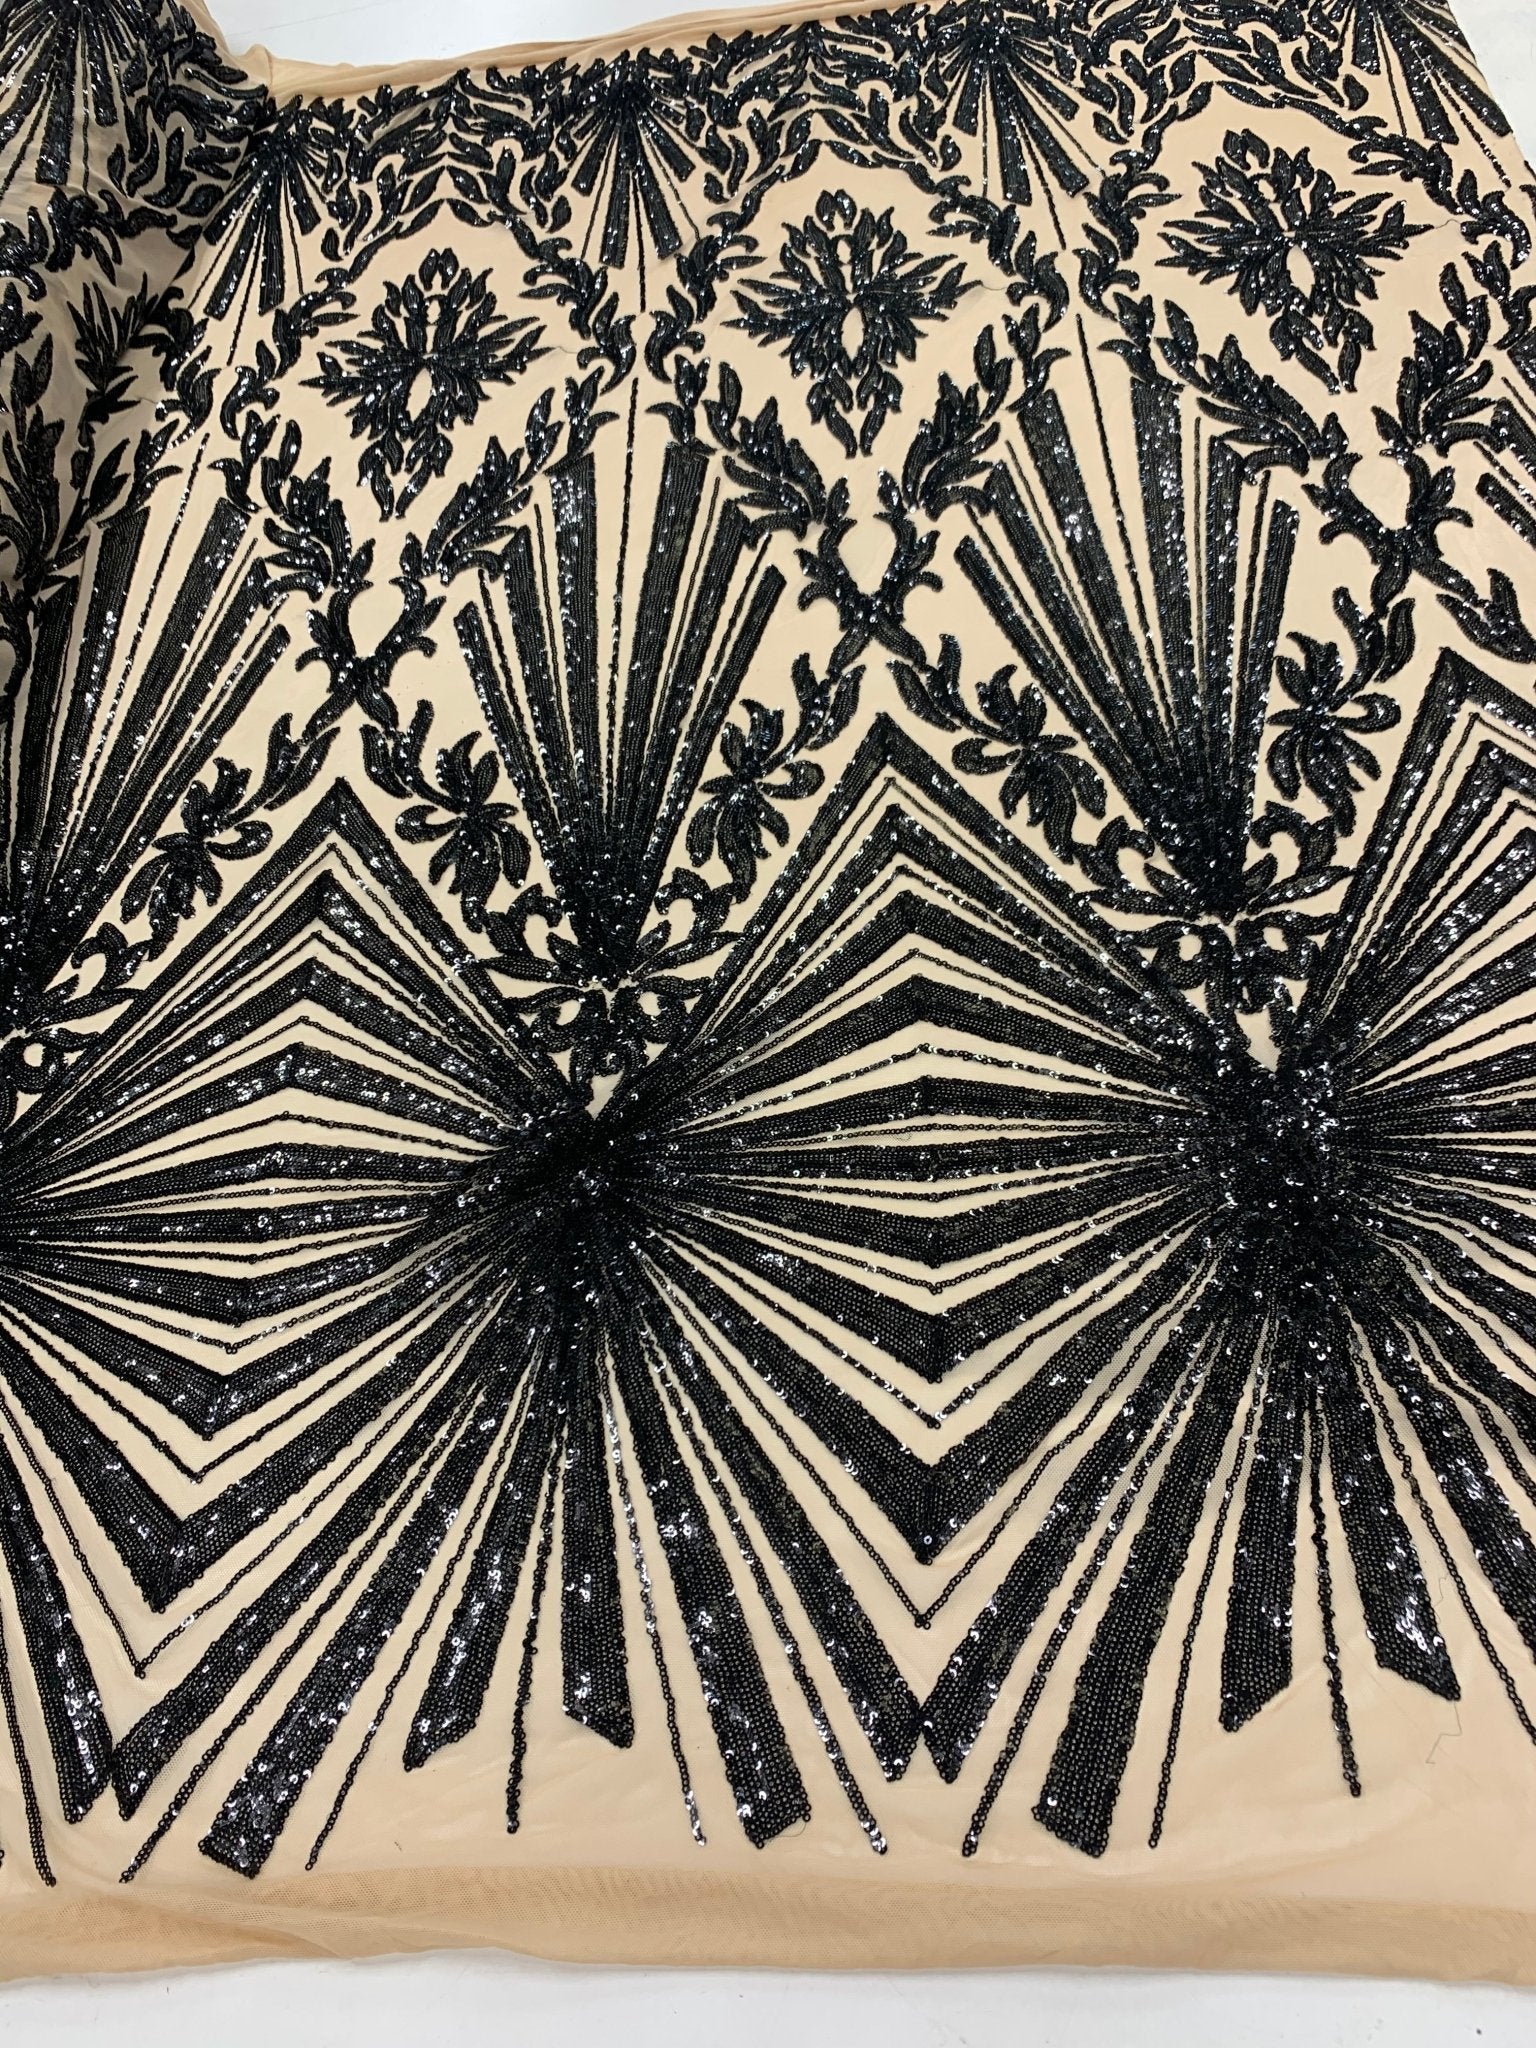 French Embroidery Stretch Sequins Fabric By The Yard on a Mesh LaceICEFABRICICE FABRICSBlack on Nude MeshFrench Embroidery Stretch Sequins Fabric By The Yard on a Mesh Lace ICEFABRIC Gray